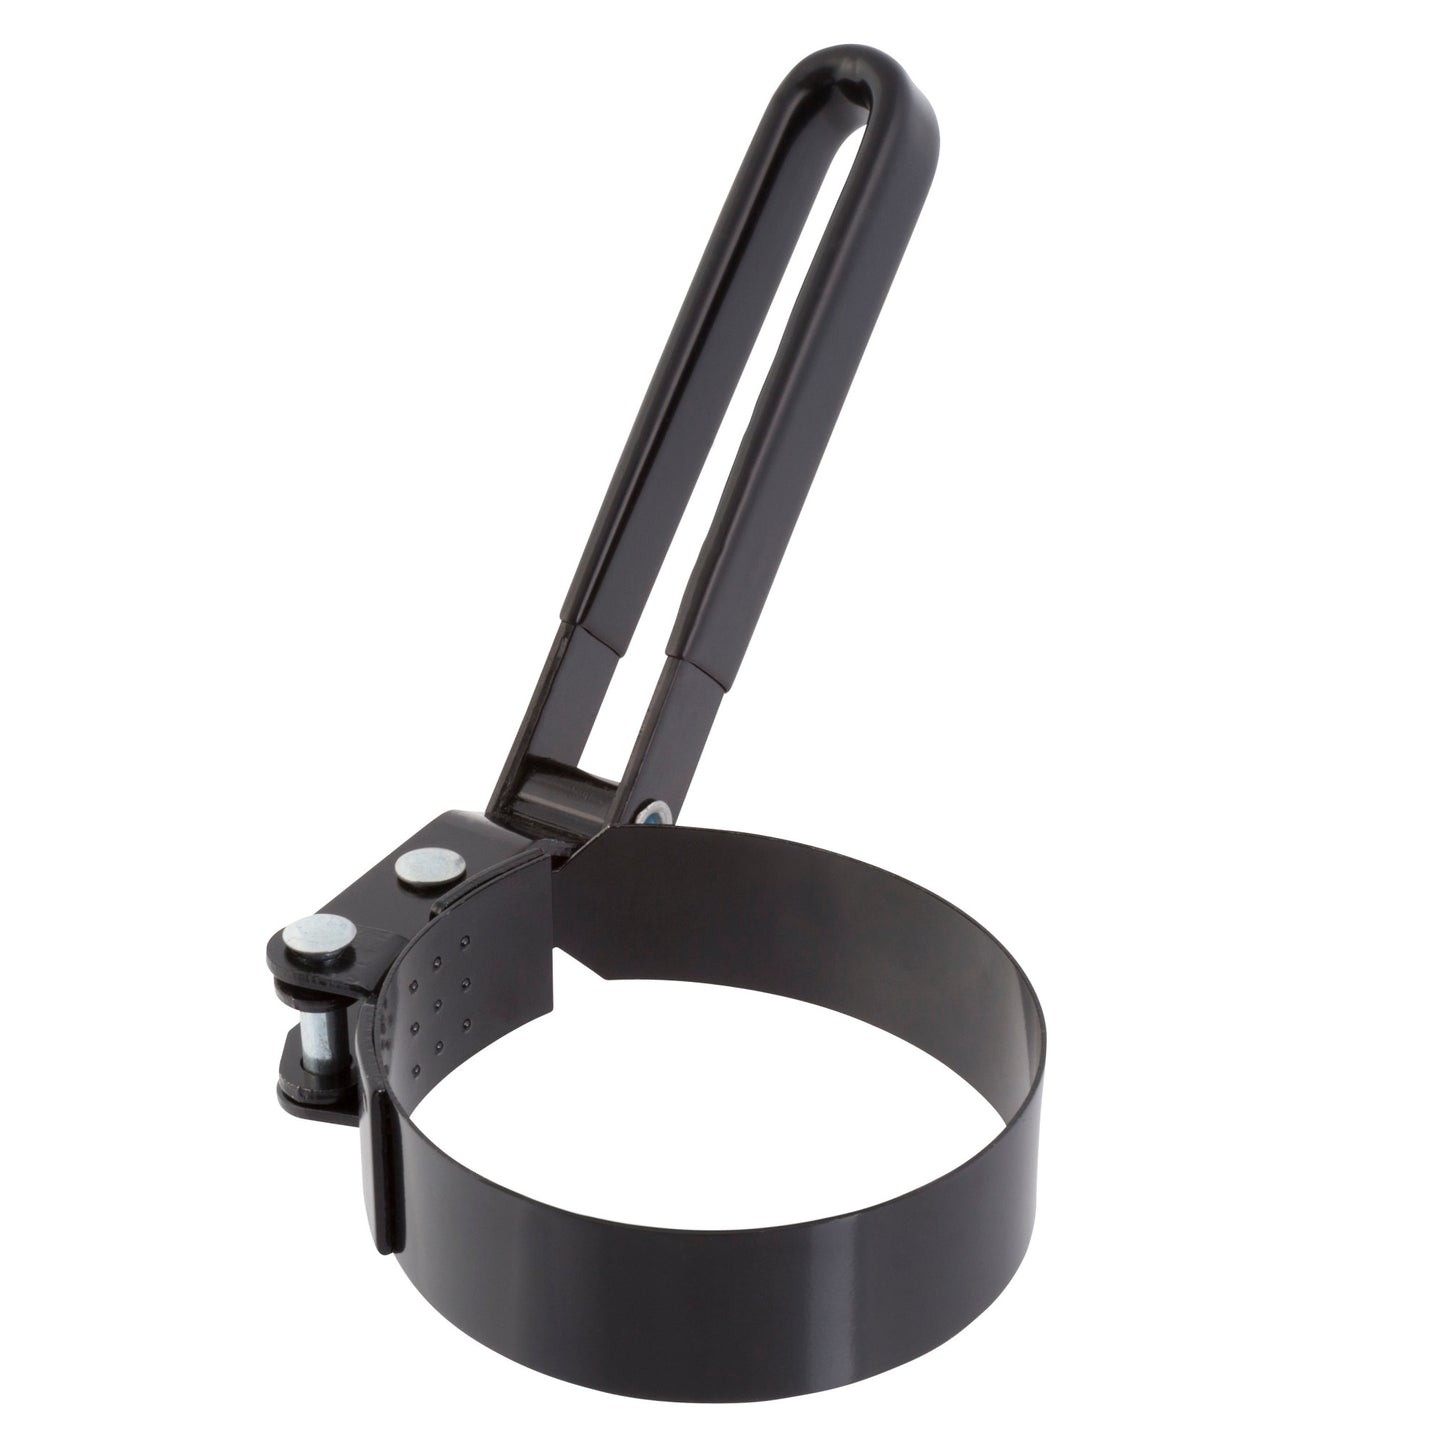 Oil Filter Wrench 2-7/8-inch to 3-1/4-inch